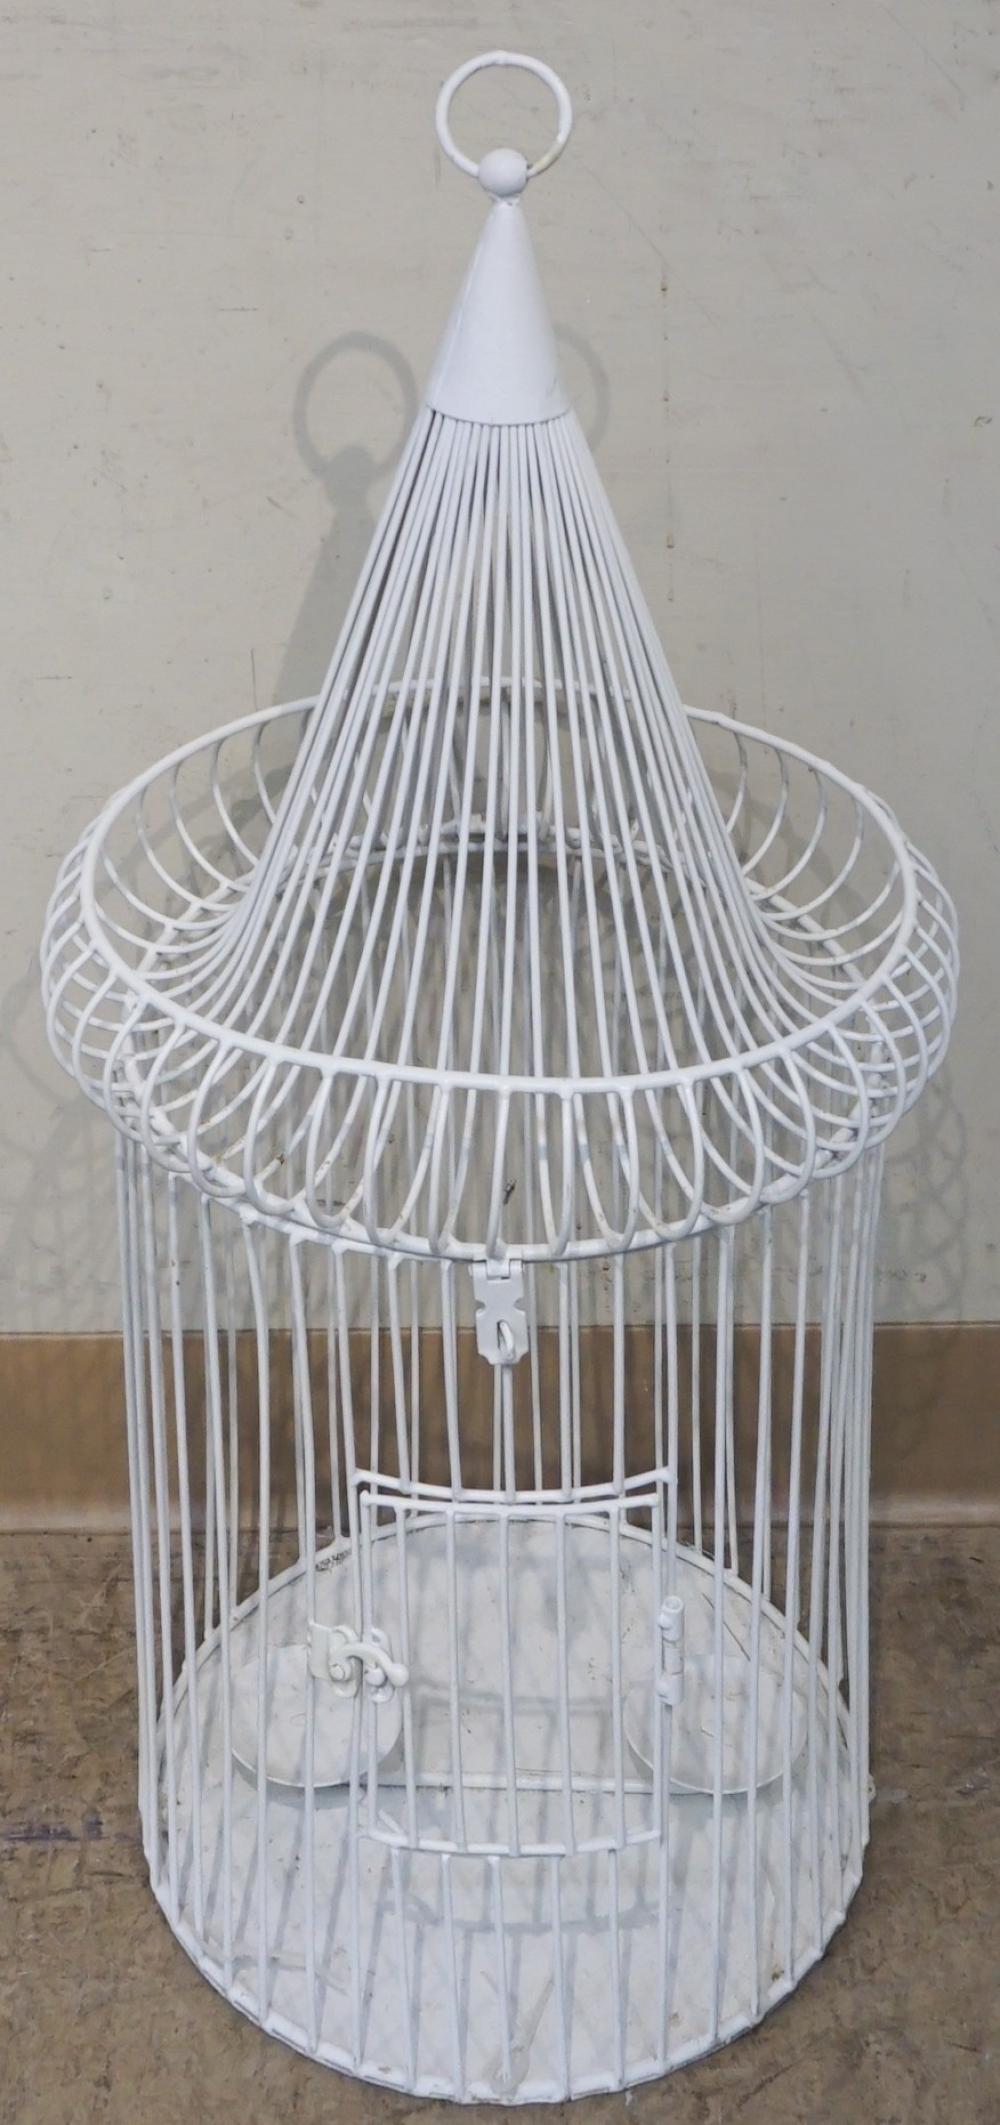 WHITE PAINTED METAL BIRD CAGE  32d087